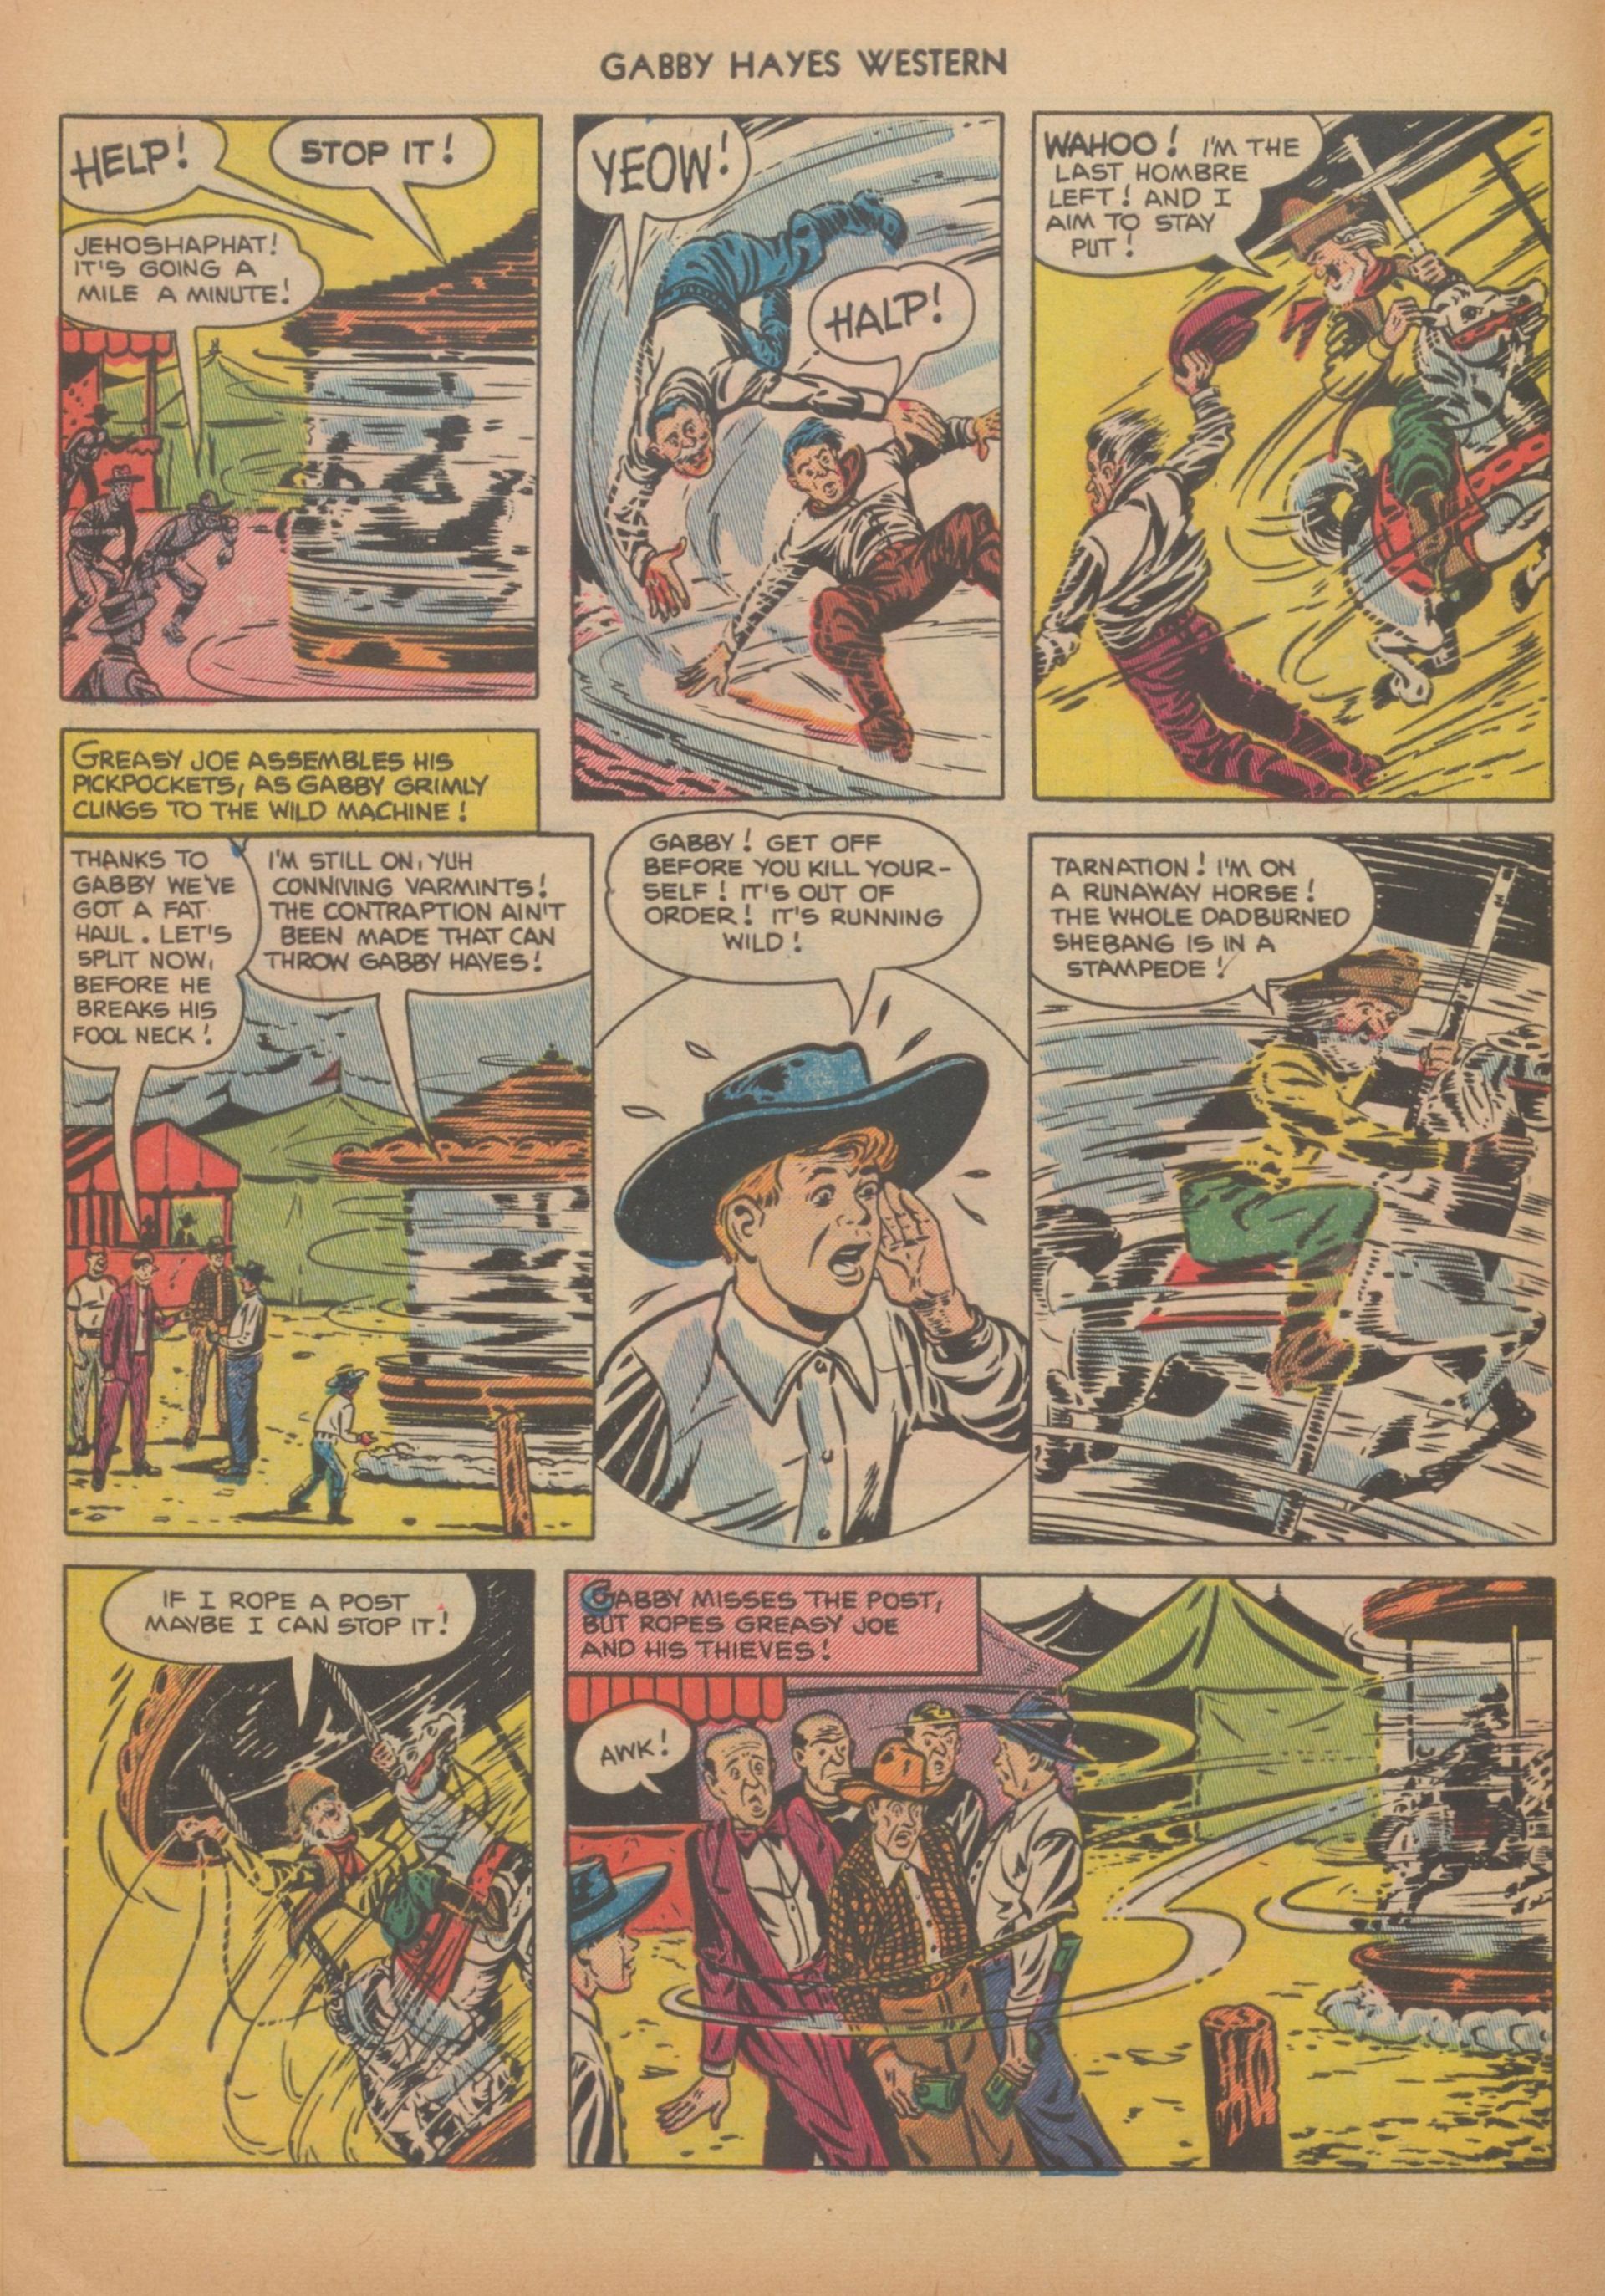 Read online Gabby Hayes Western comic -  Issue #41 - 8